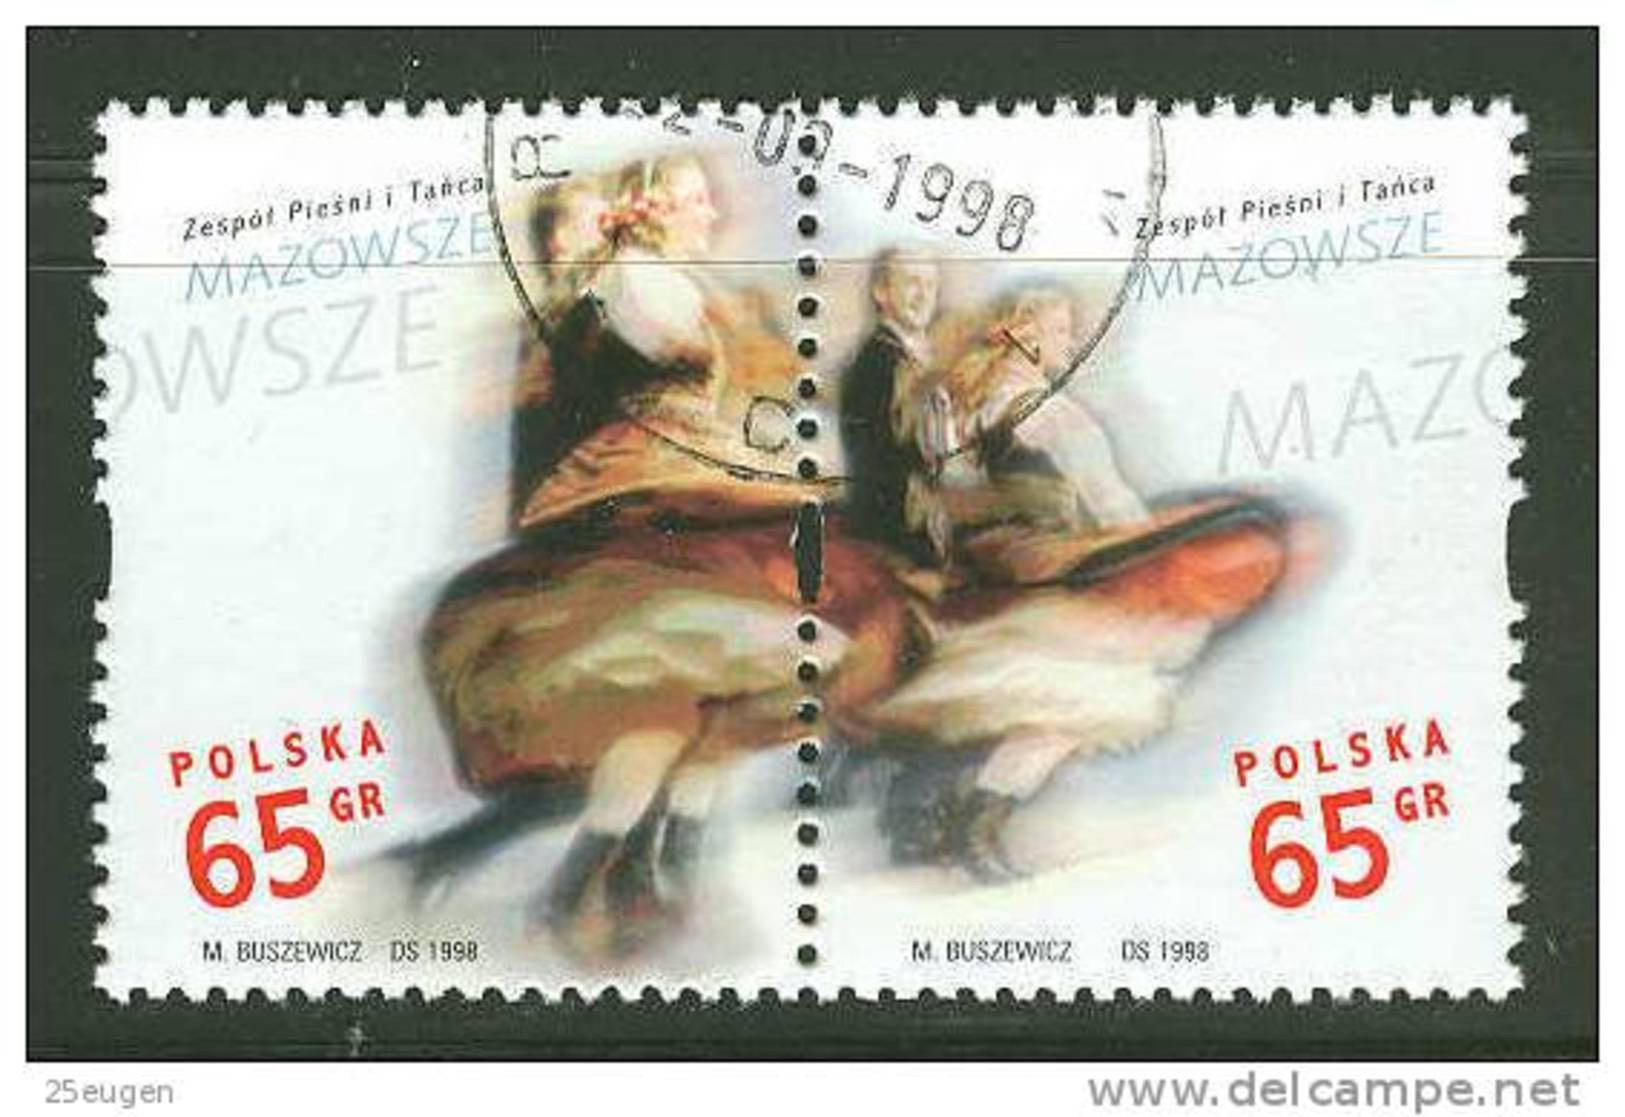 POLAND 1998 MICHEL No: 3727-3728 USED - Used Stamps